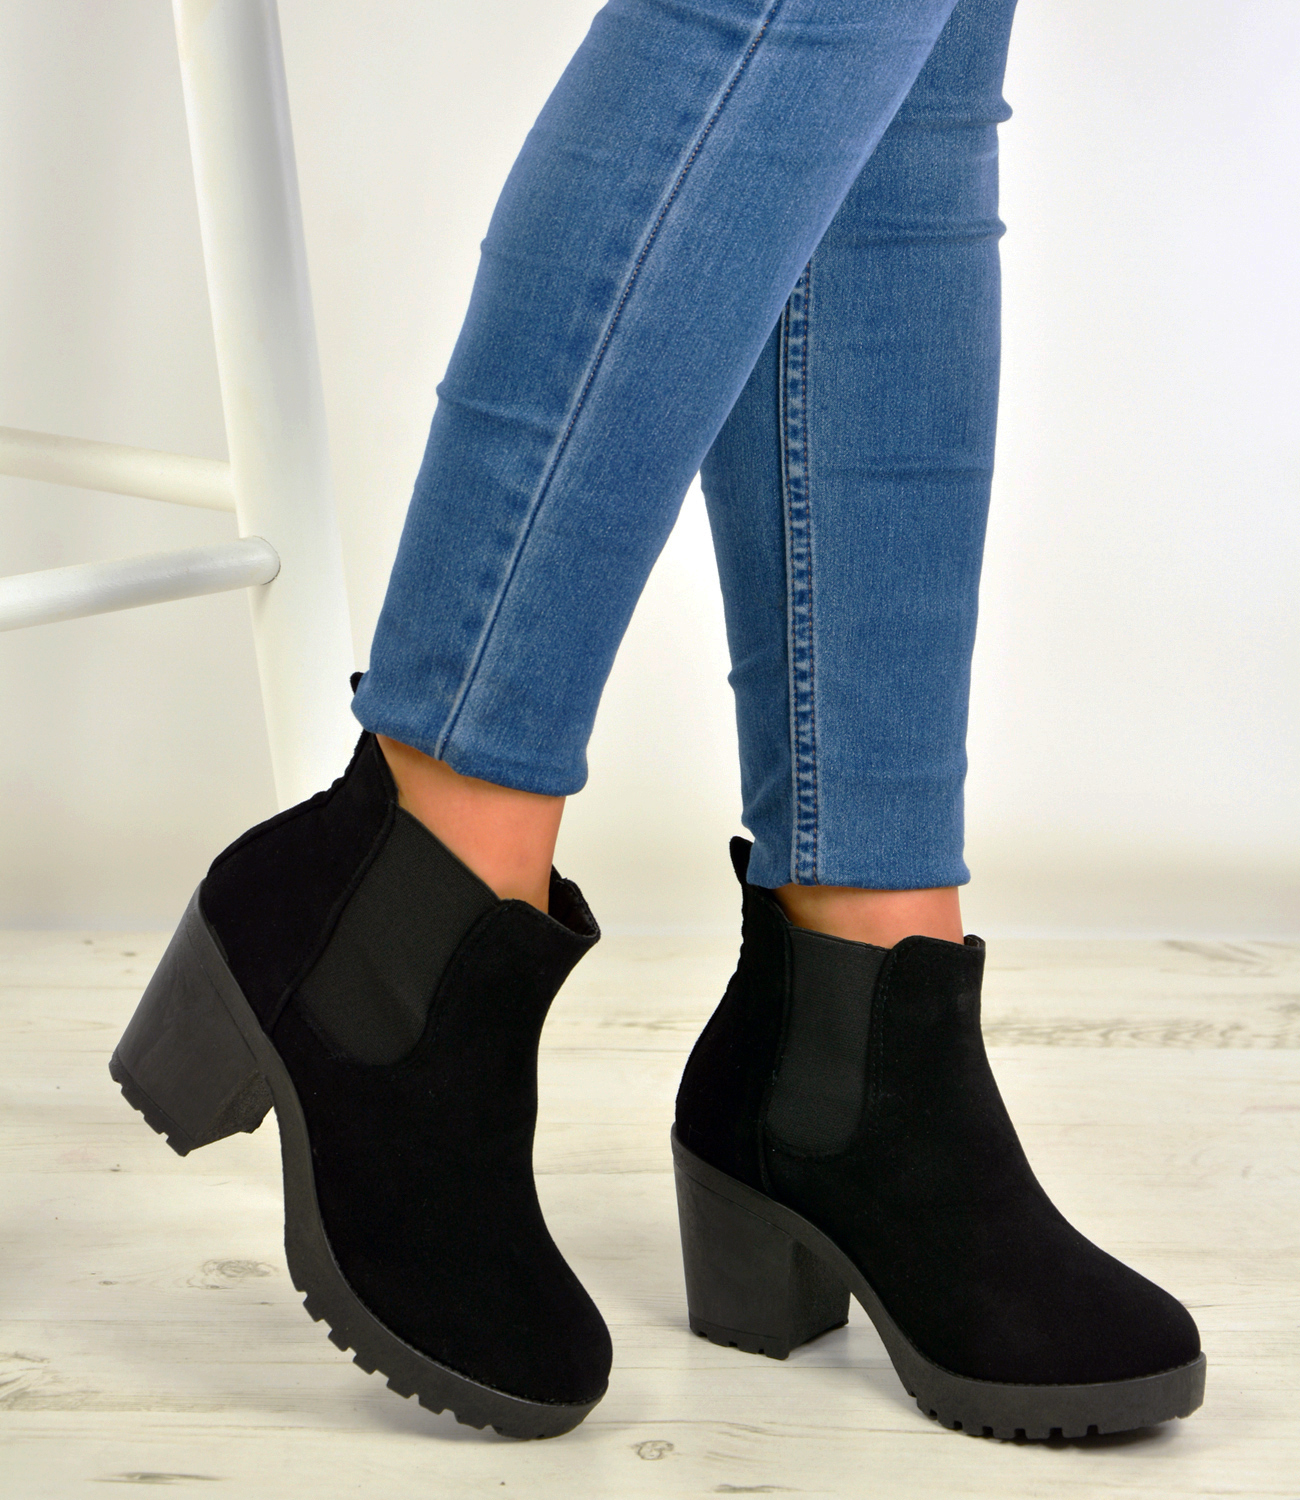 New Womens Ankle Chelsea Boots Chunky Block Heels Platform Shoes Size ...